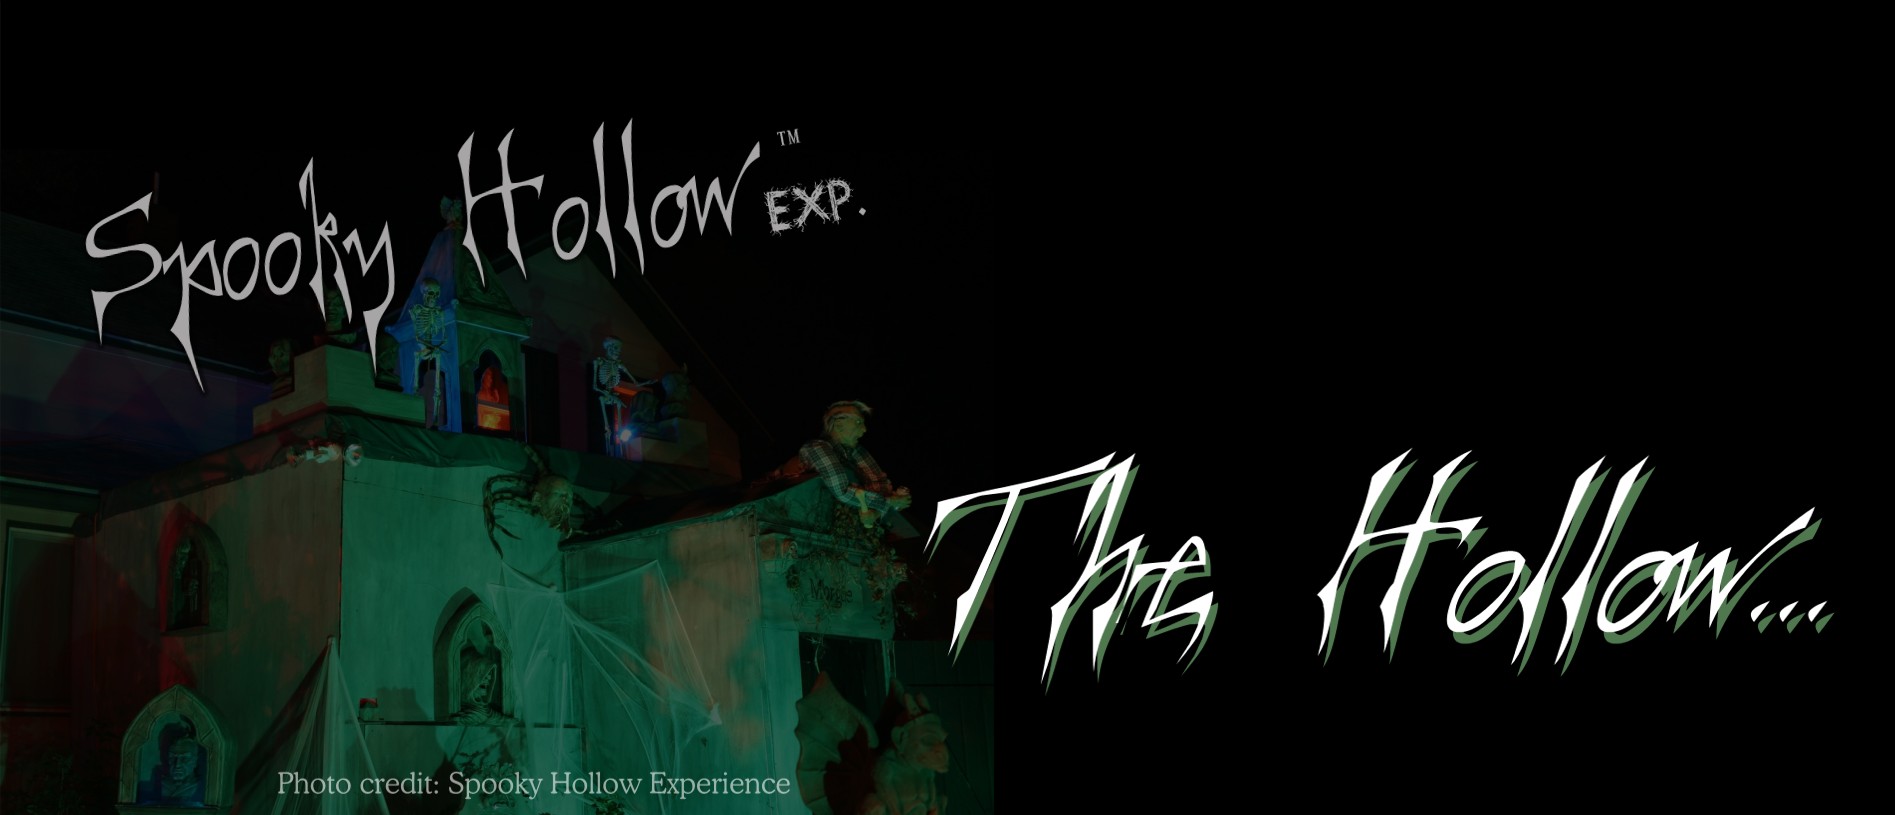 Spooky Hollow Experience copyright 2010 title